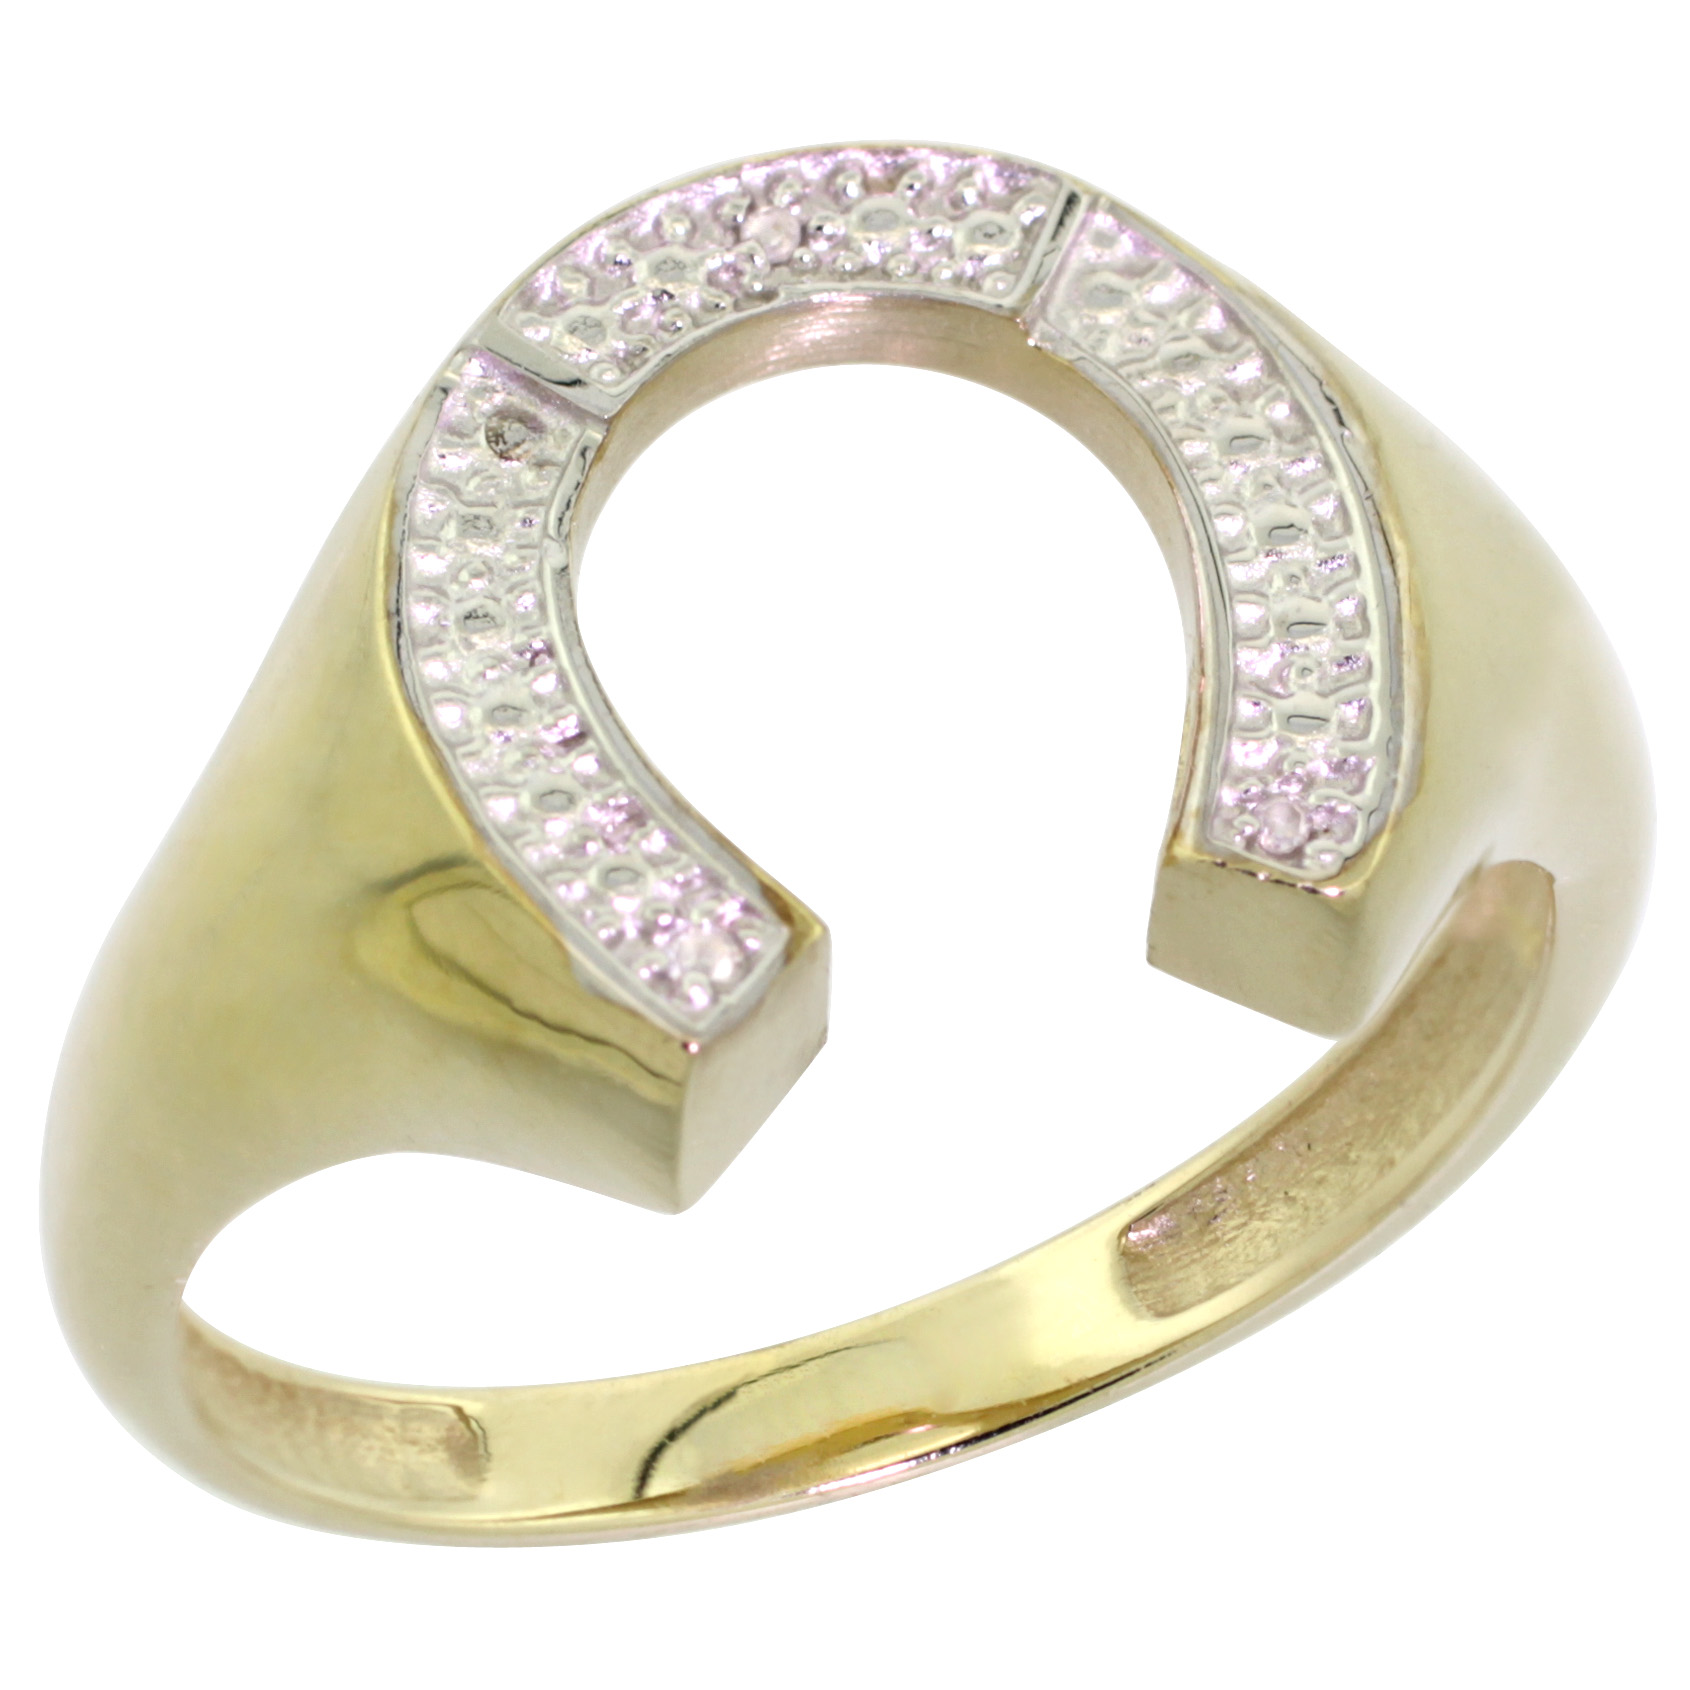 10K Yellow Gold Mens Horseshoe Ring Diamond Accent 9/16 inch wide, sizes 8 - 13